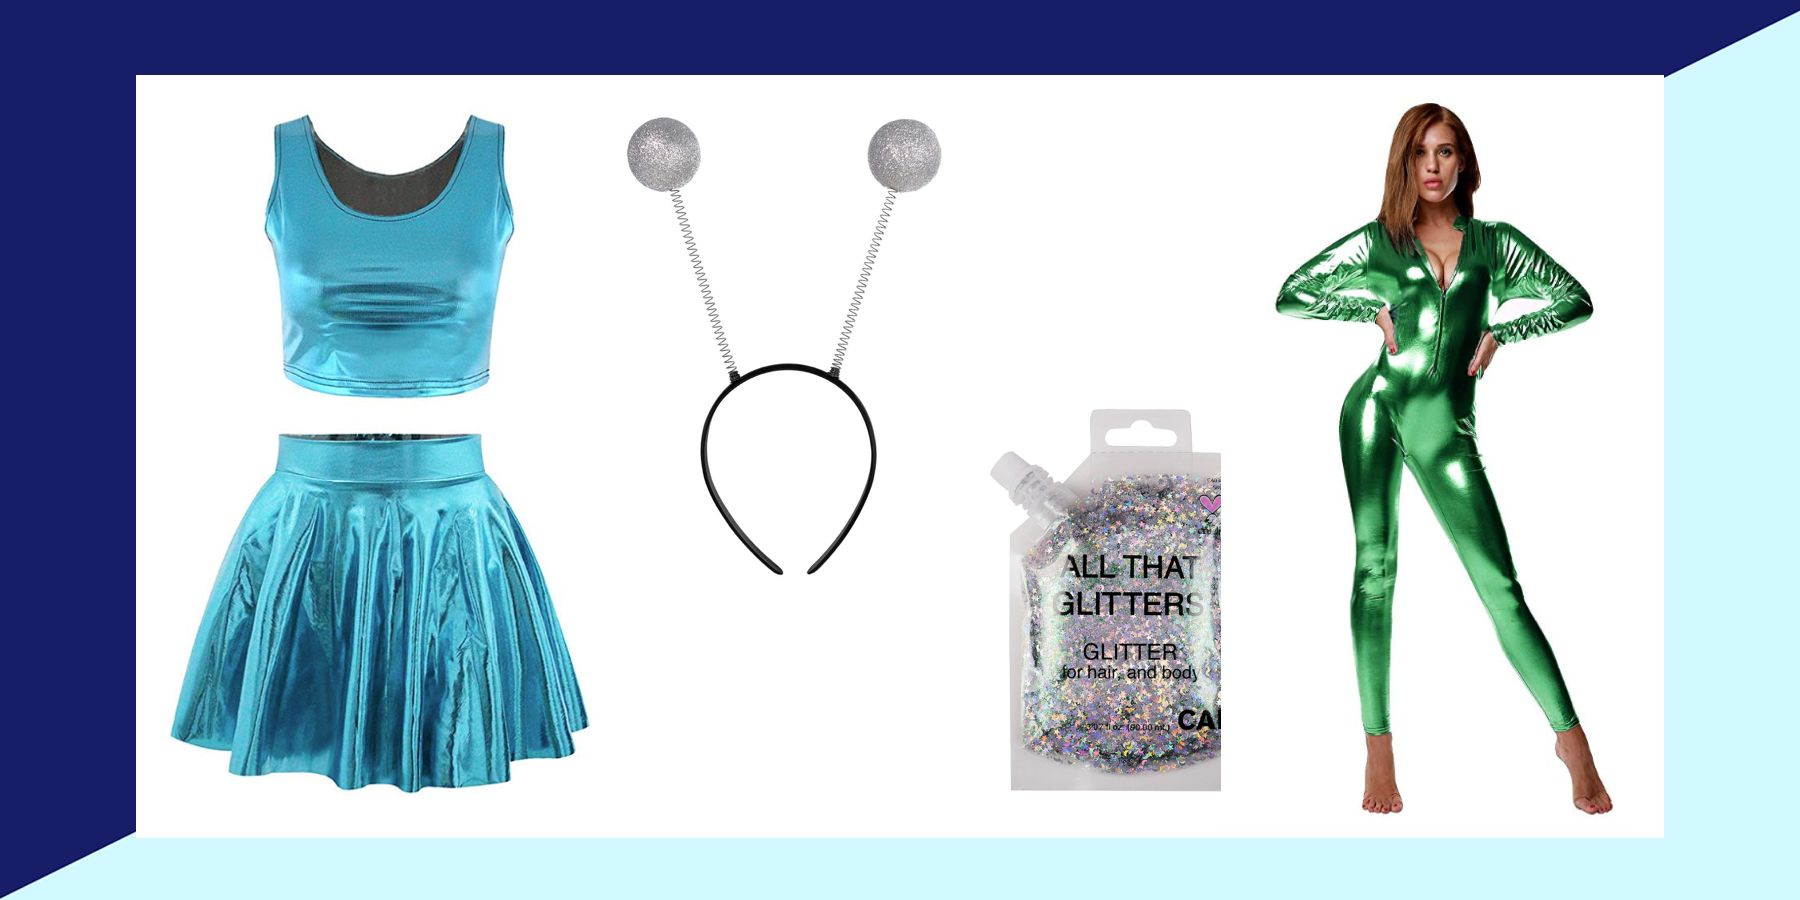 Adult Inflatable Alien Pick-Me-Up Costume | Party City